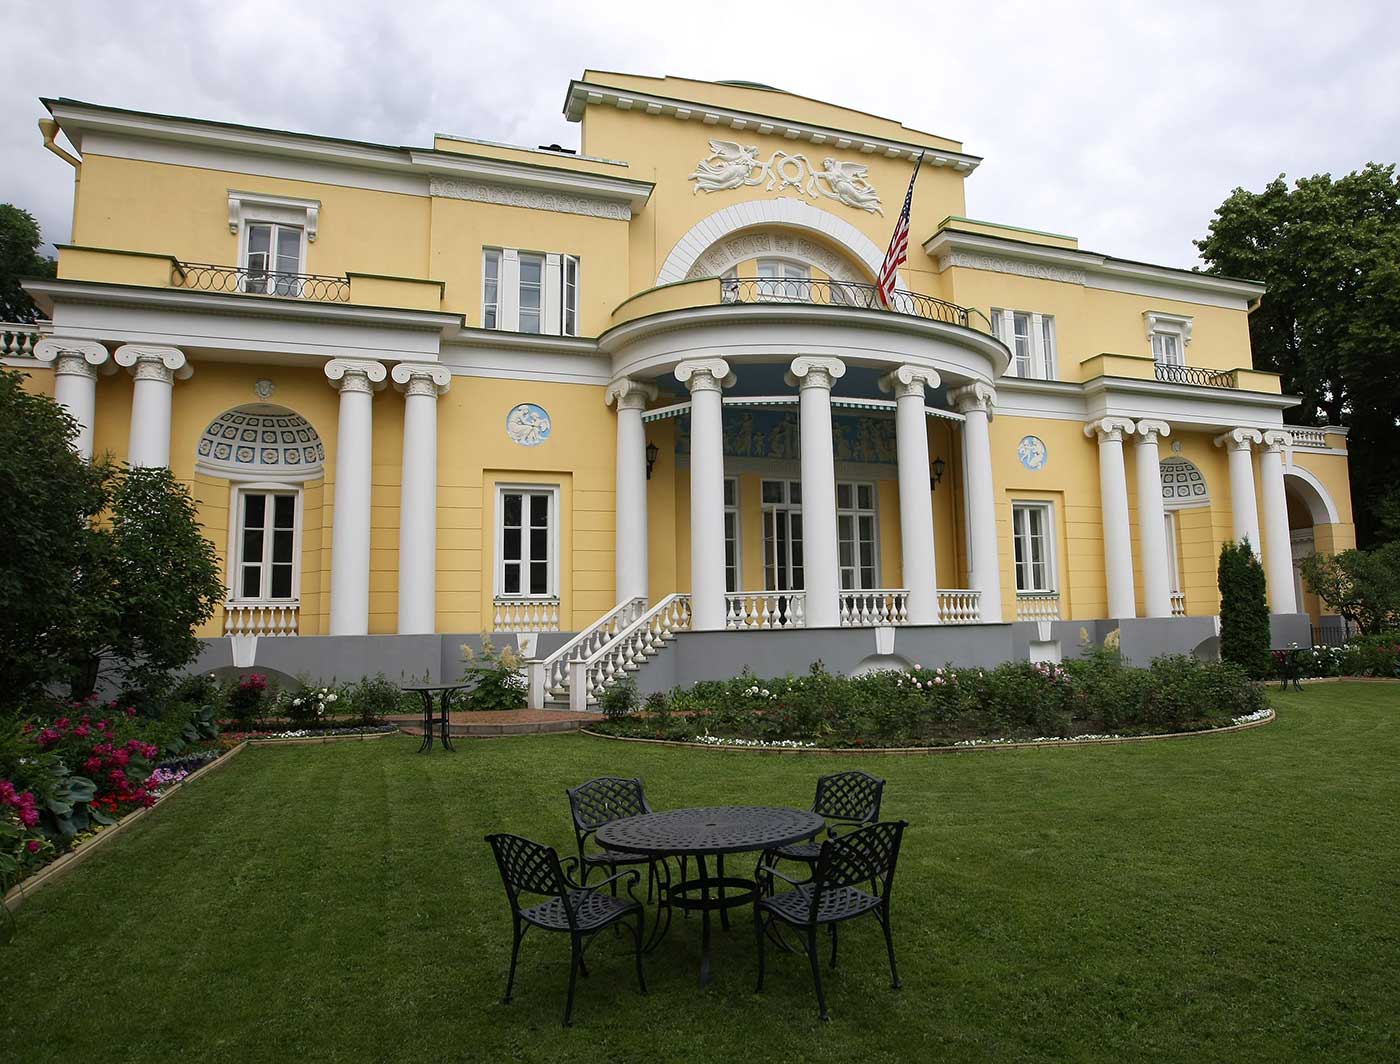 United States Russian Ambassador residence: Spaso House in Moscow